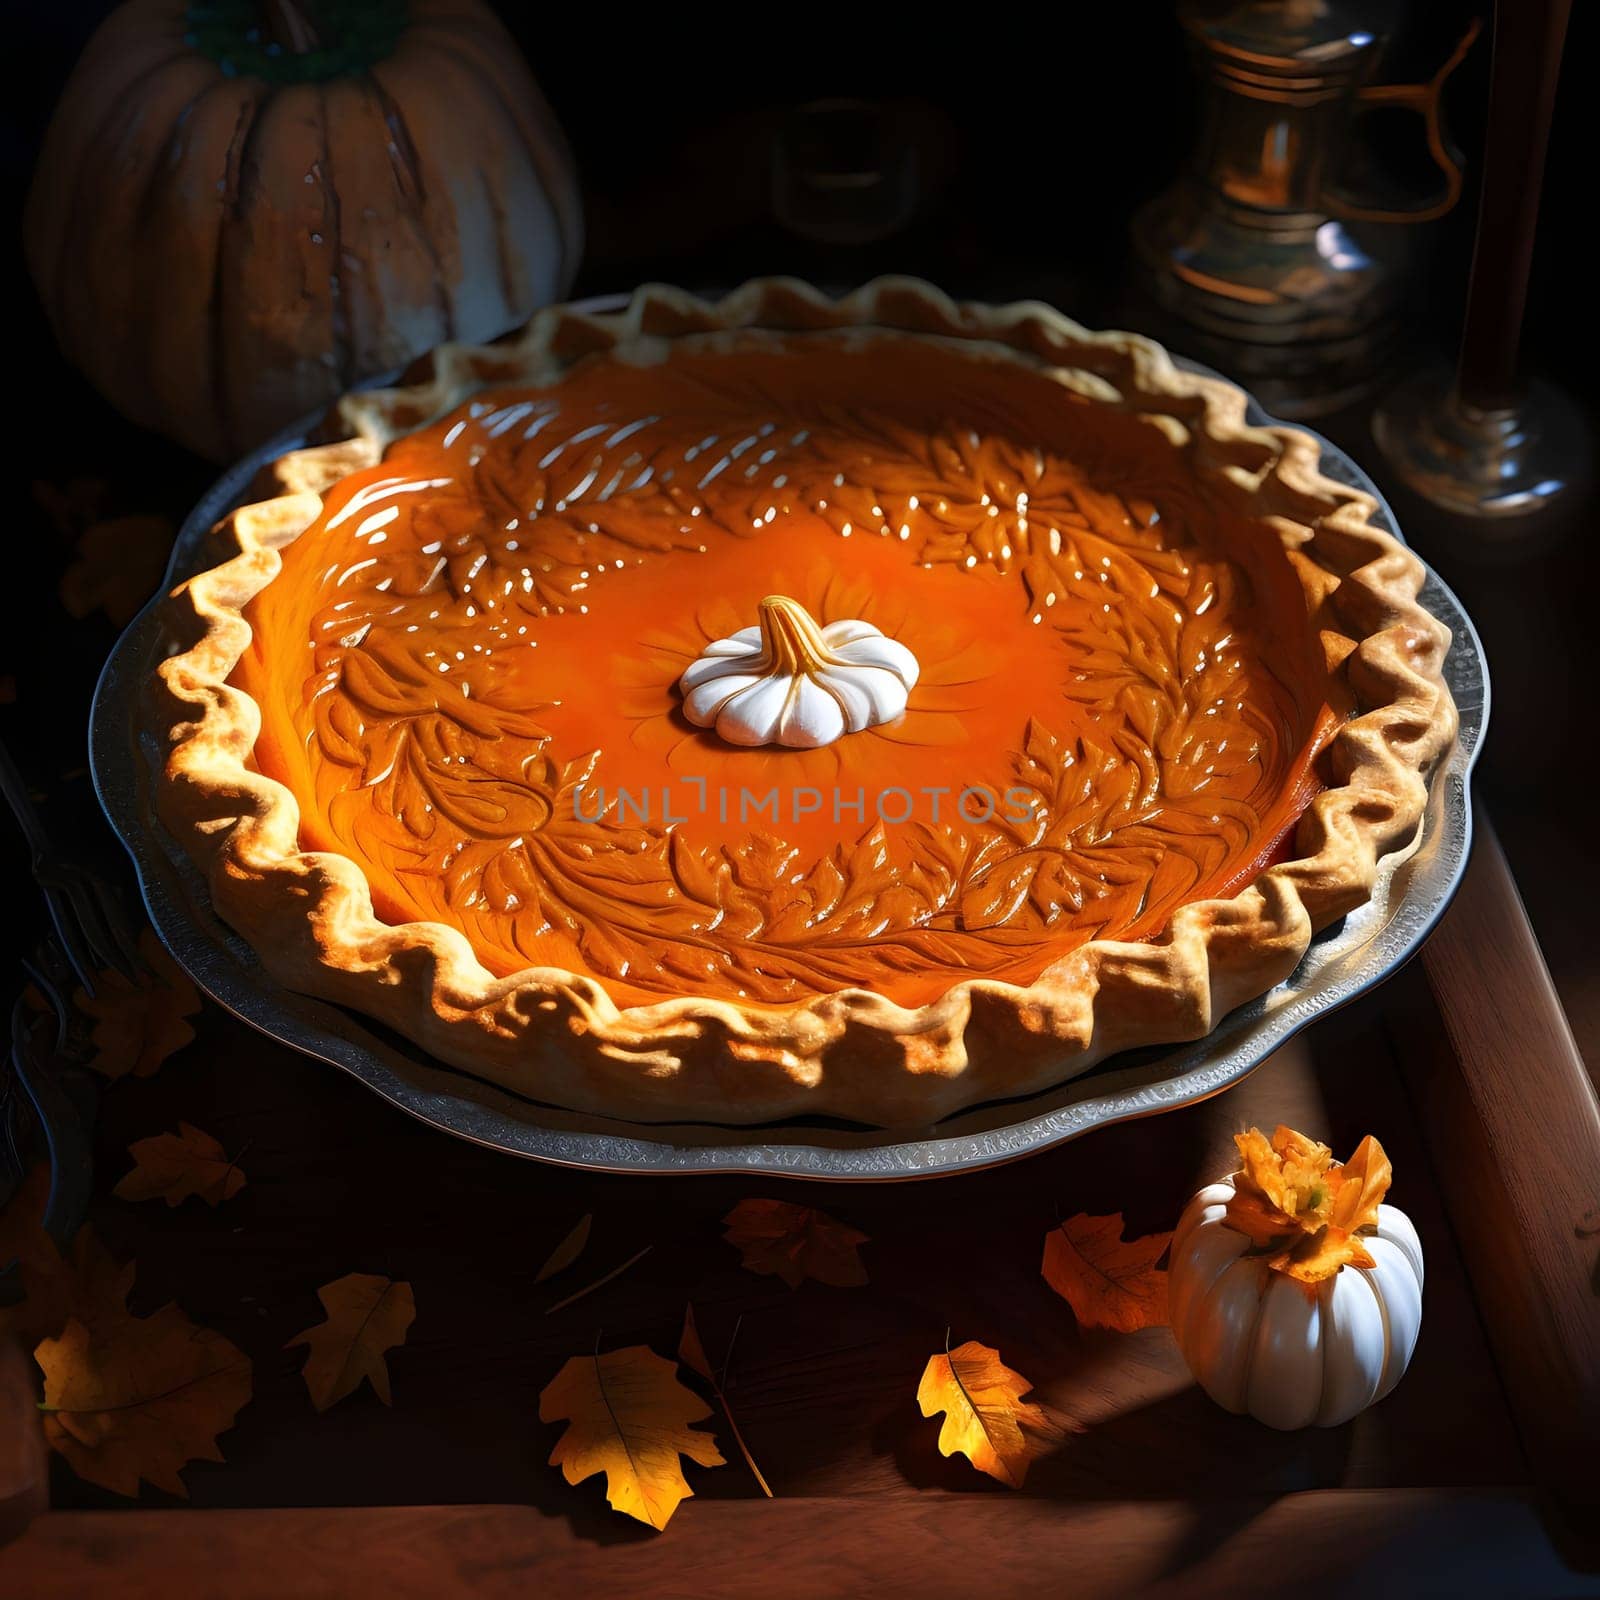 Pumpkin pie. Pumpkin as a dish of thanksgiving for the harvest. The atmosphere of joy and celebration.